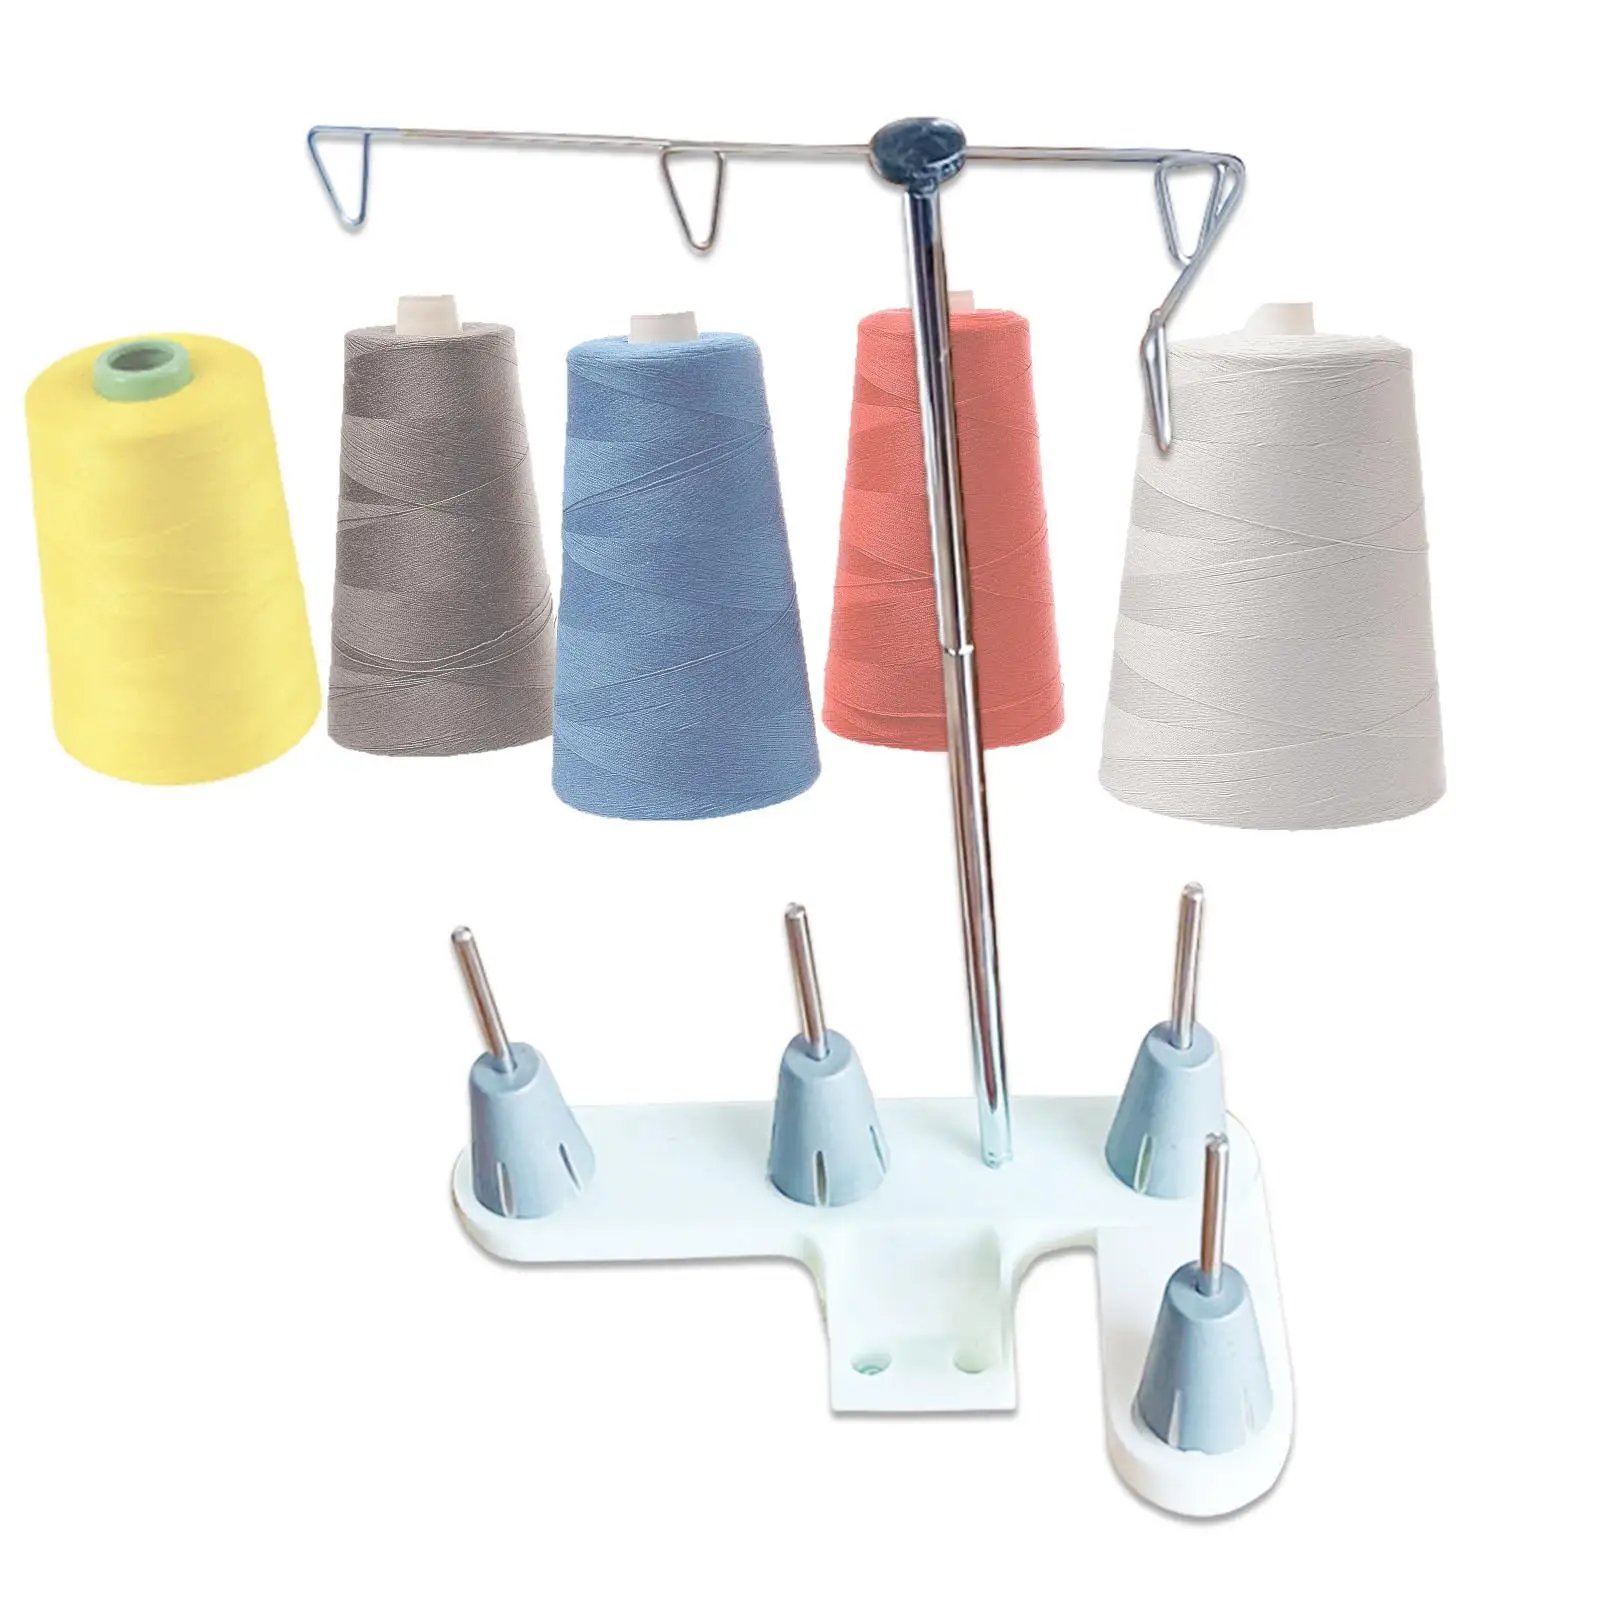 Thread Spool Holder Easy Installation Simple to Use Practical Home Thread Stand for Serger Machines Embroidery Quilting Fitments